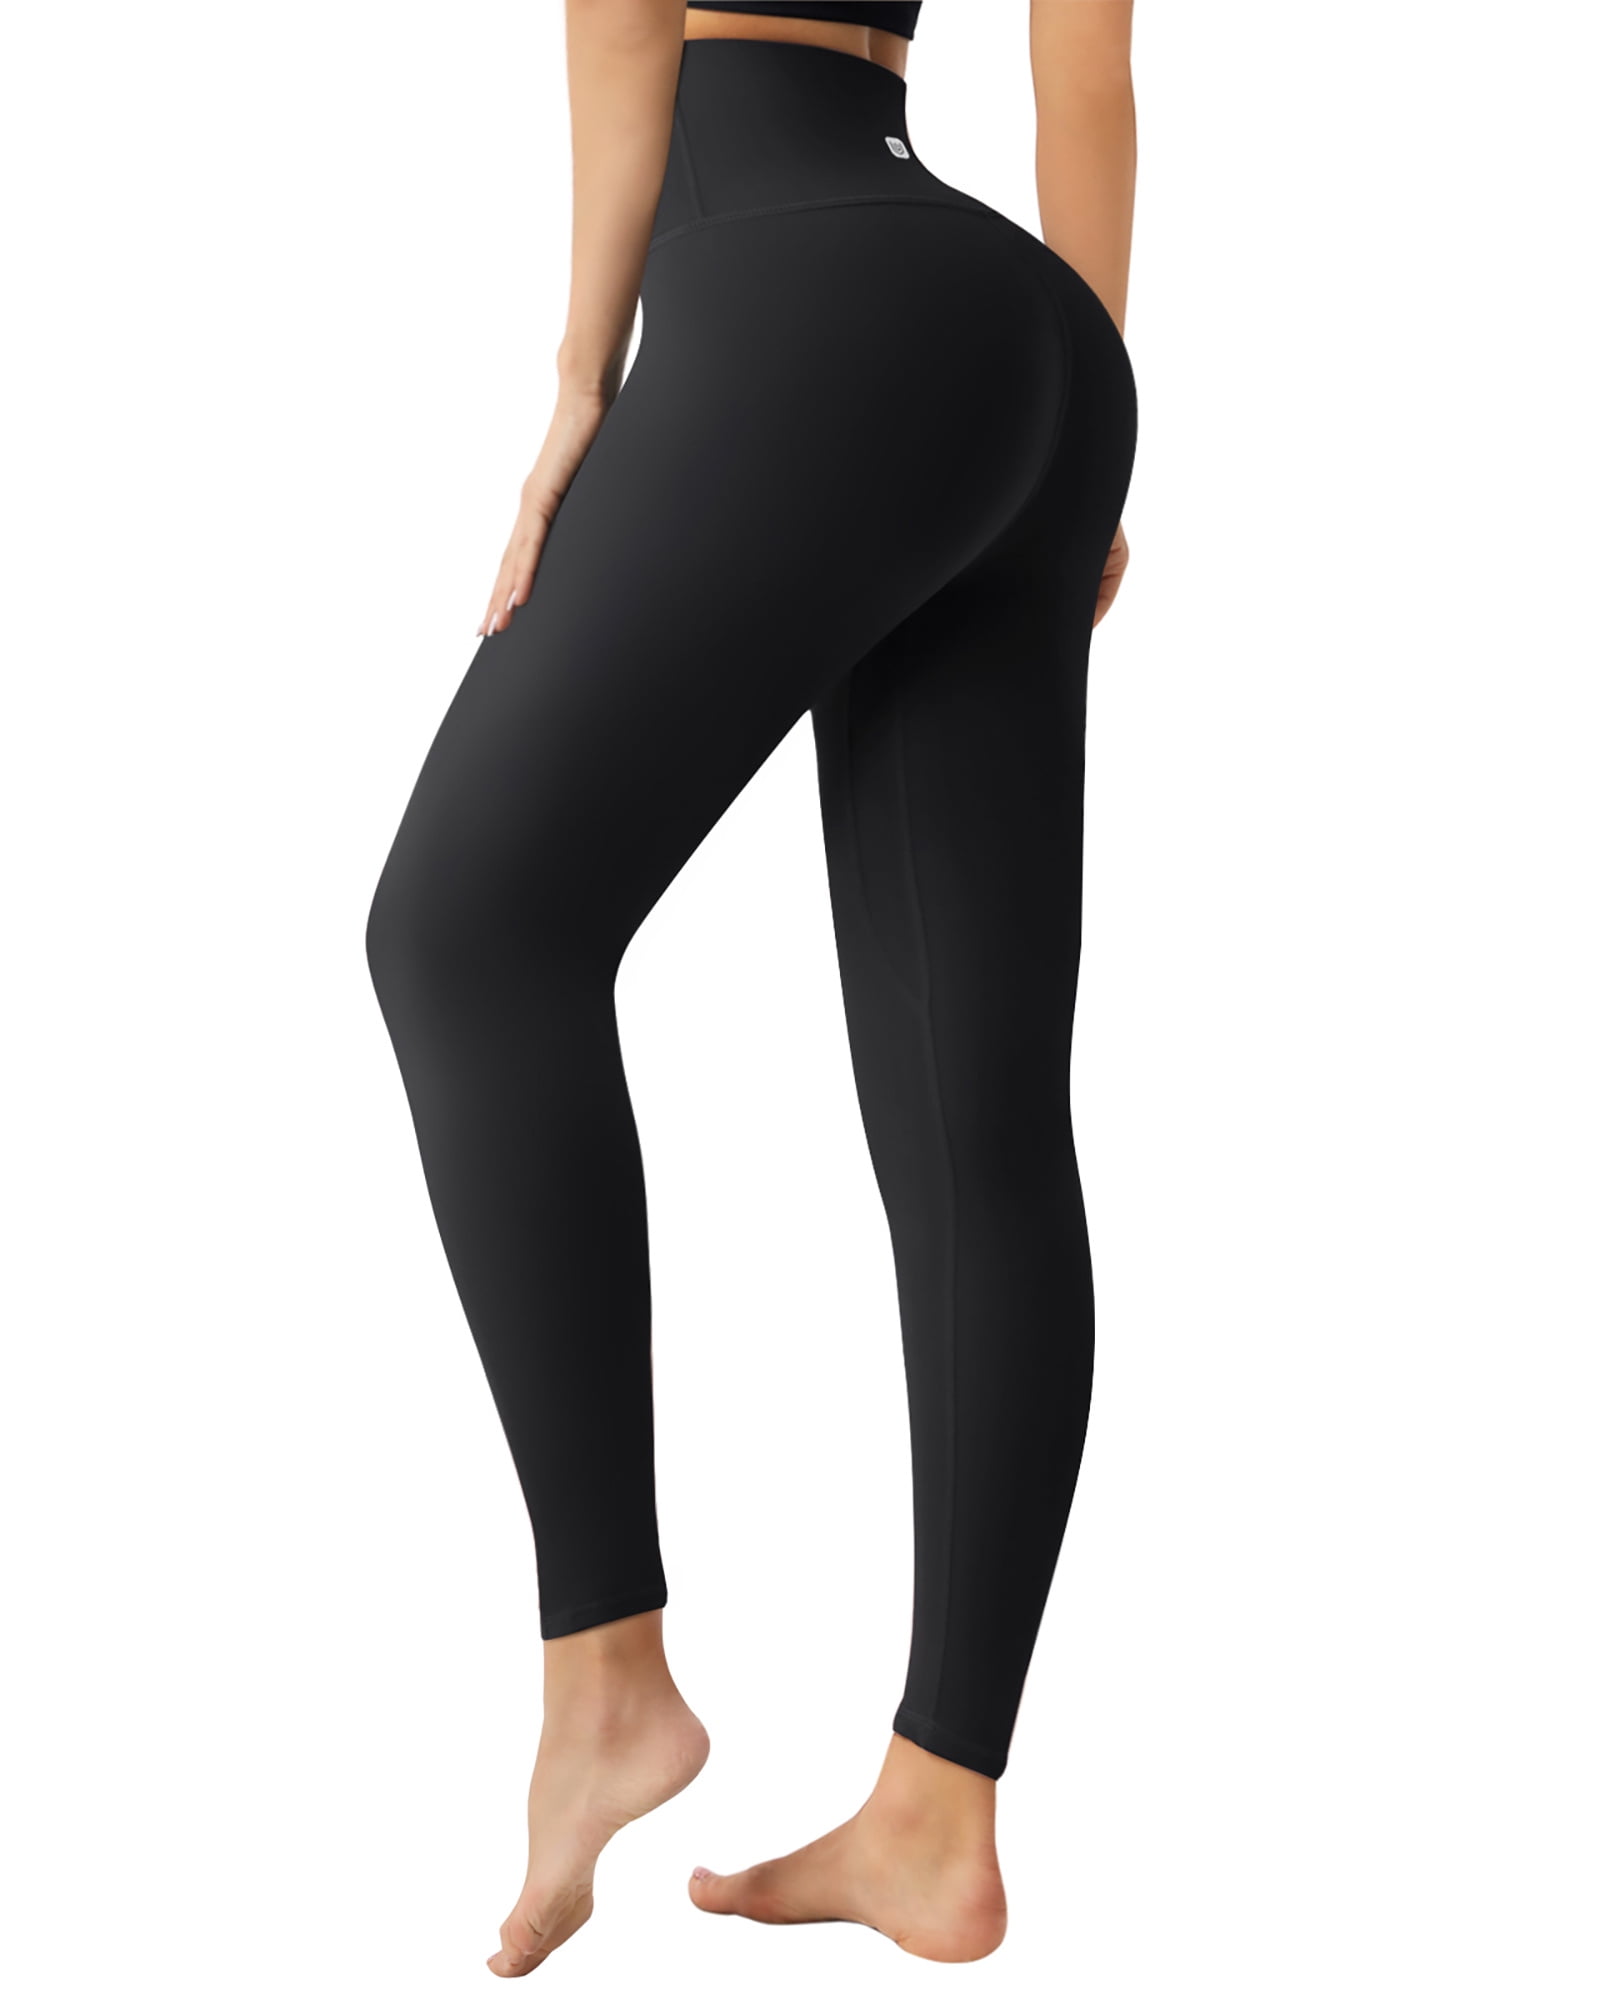 UUE 25Inseam Black Workout leggins high waisted,black workout Yoga pants  with inner pockets for women,Buttery Soft leggings for Exercise 